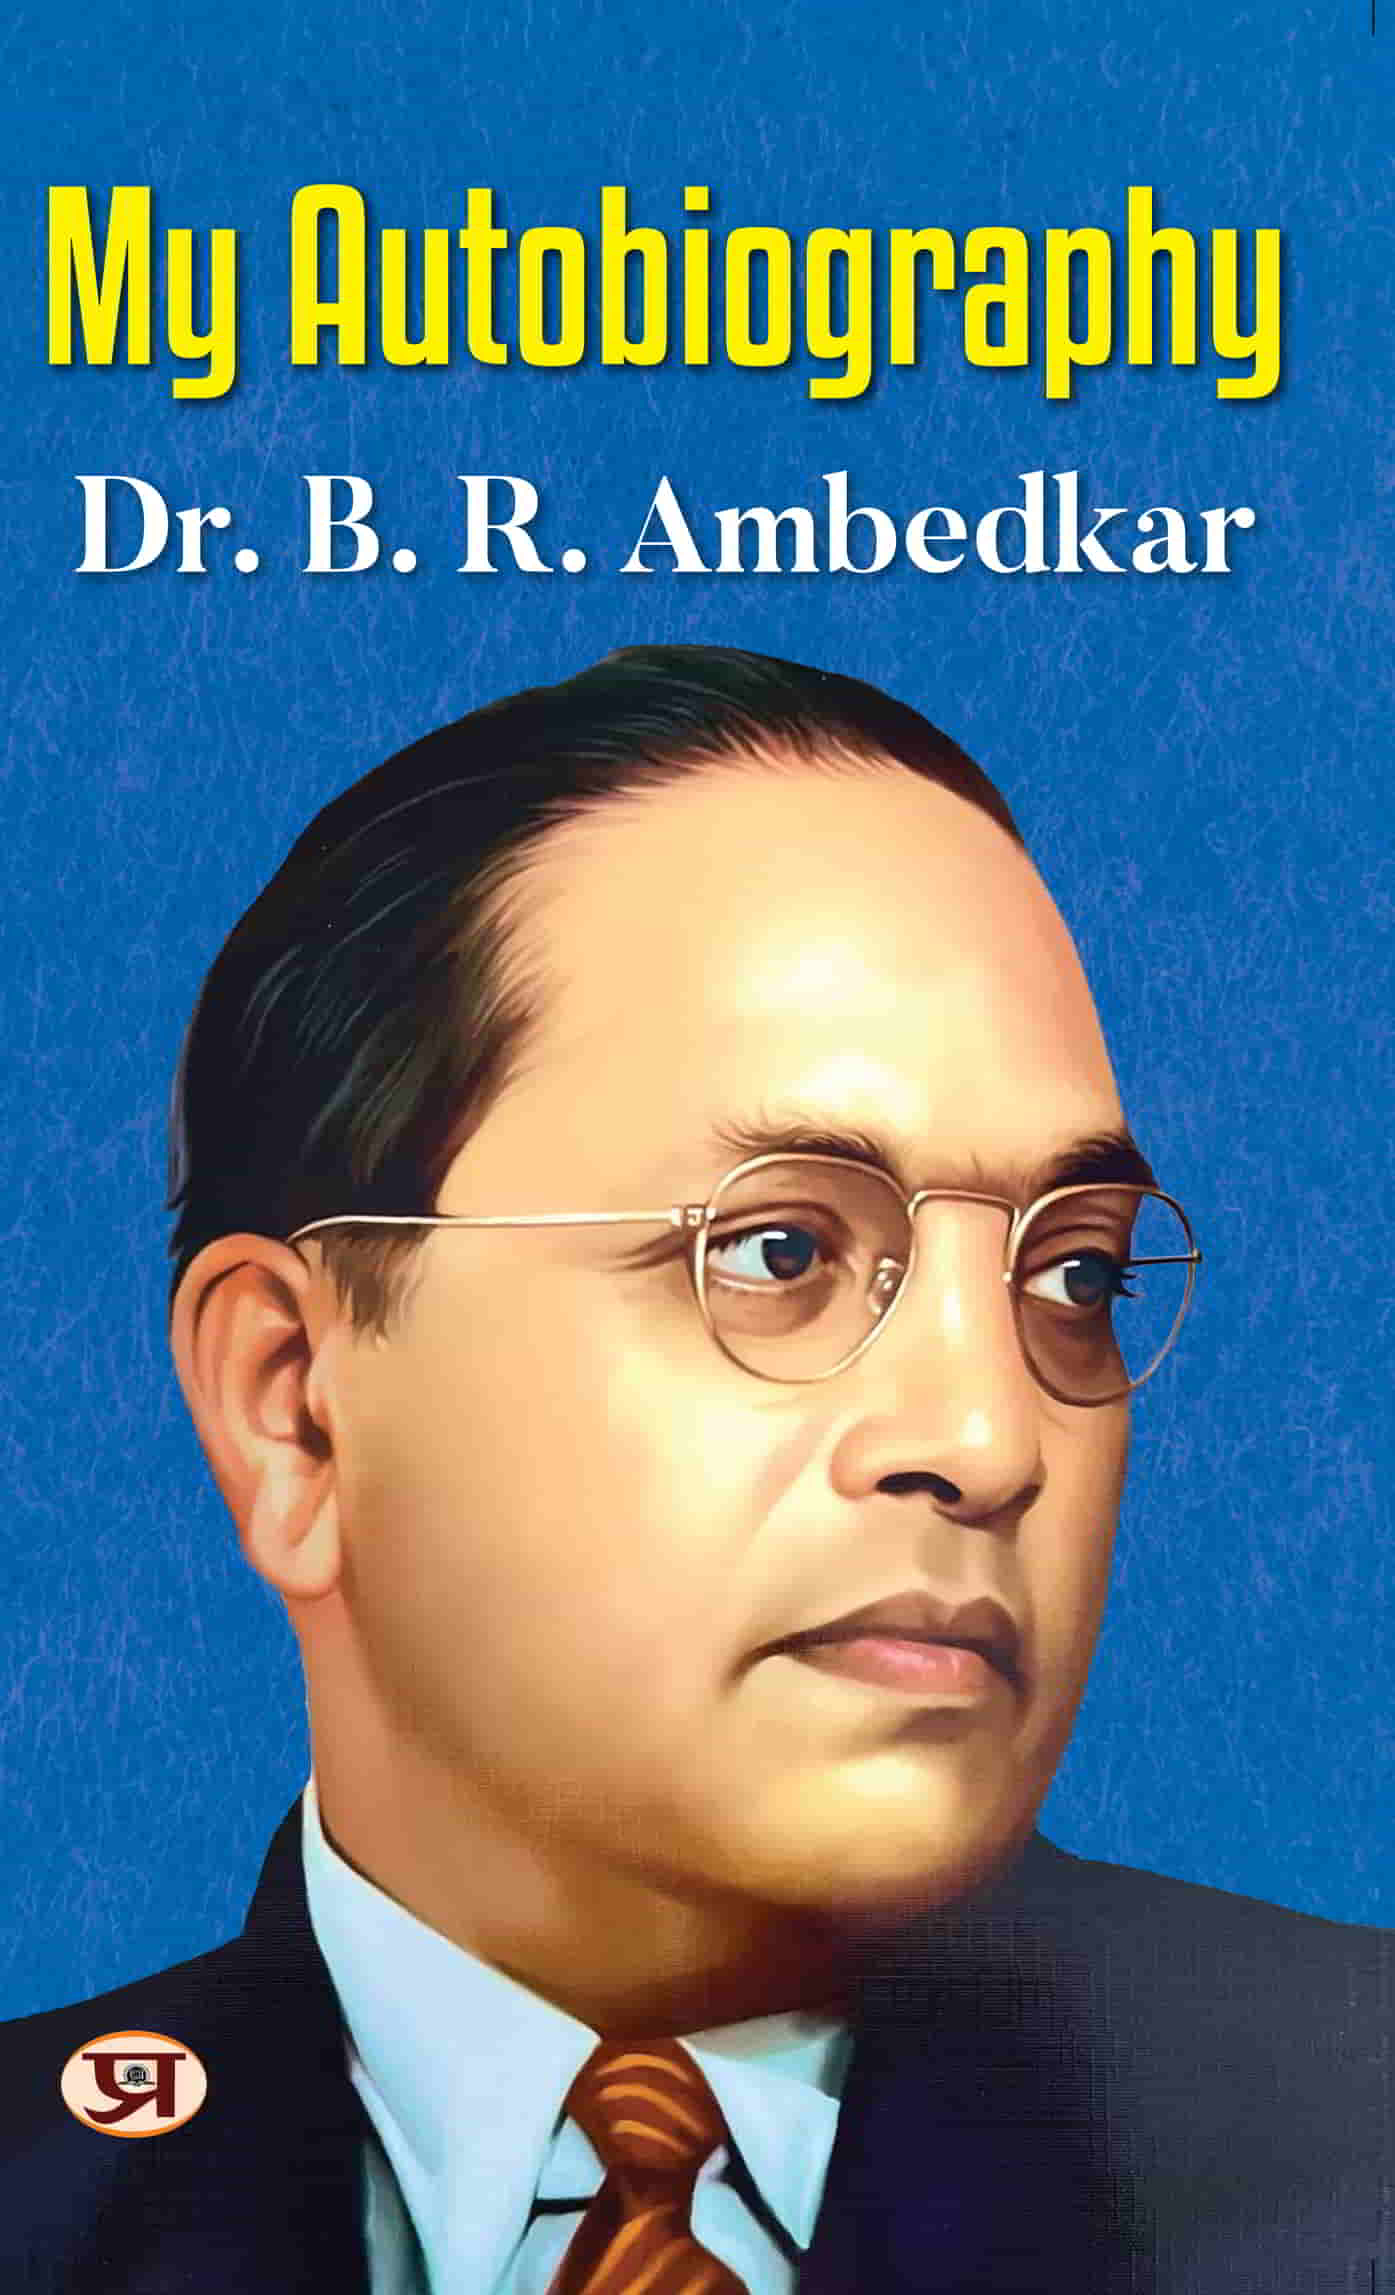 My Autobiography | Autobiography of Dr. B.R. Ambedkar | Ambedkar's Challenges, Ambitions, and Accomplishment